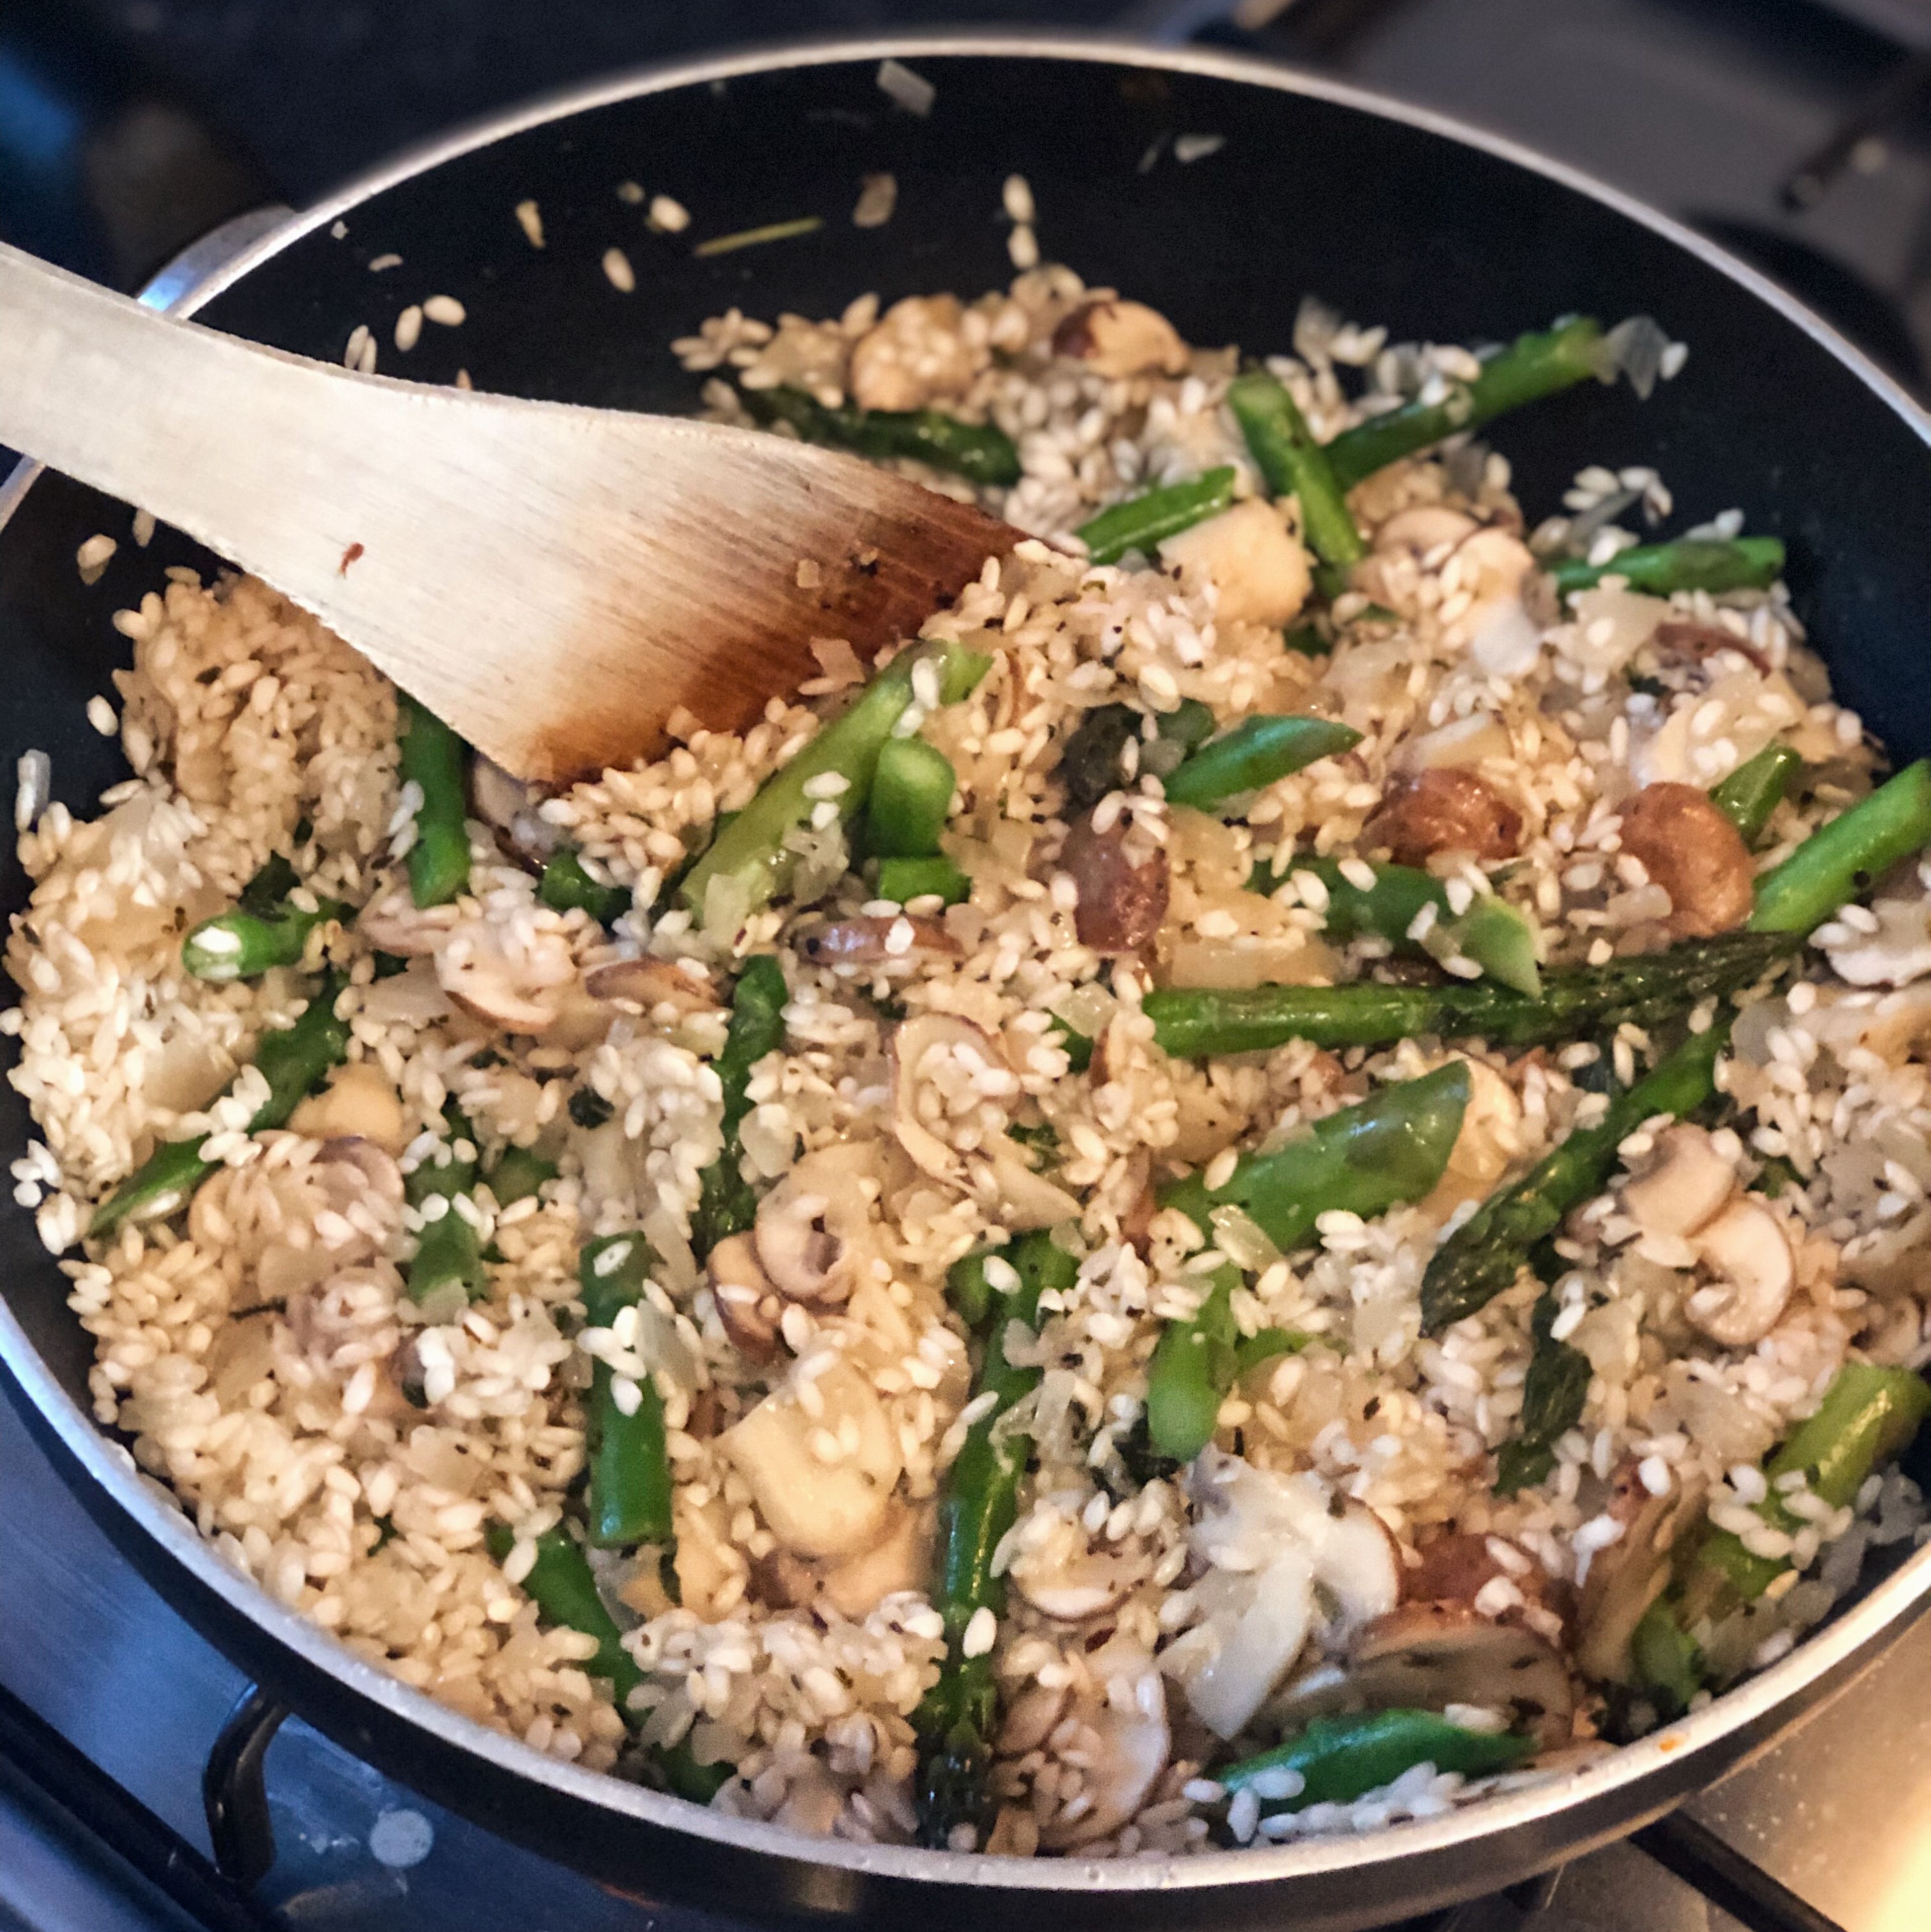 Add rice to wok and fry for 3 minutes on medium heat.